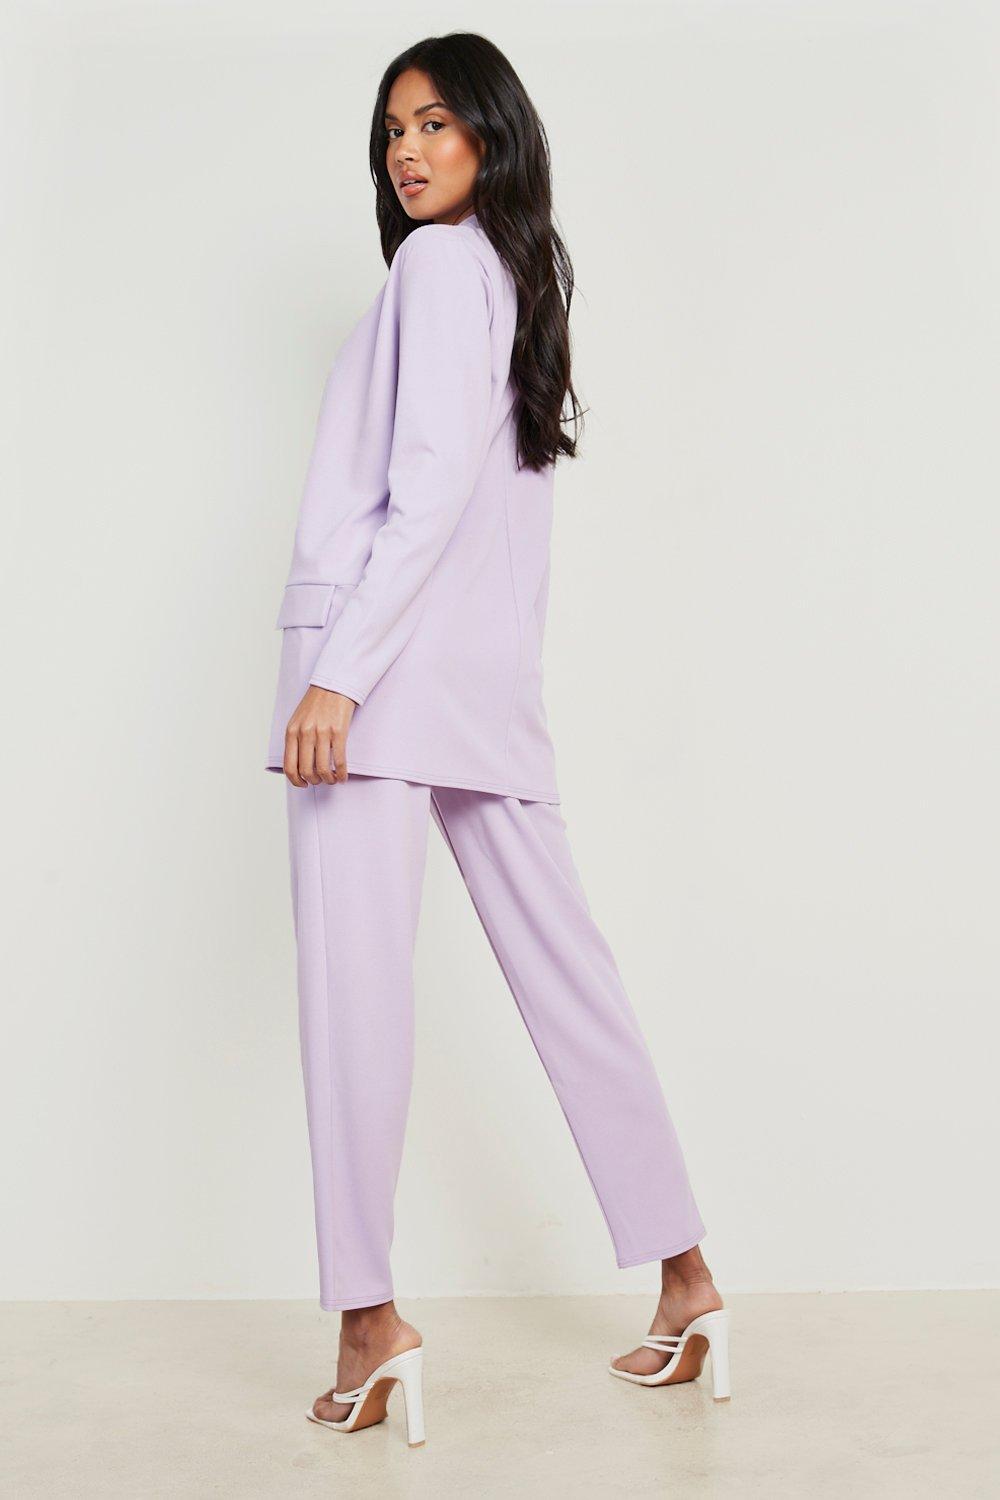 Boohoo Blazer & Self Fabric Trouser Suit Set in Lilac Purple Womens Clothing Suits 